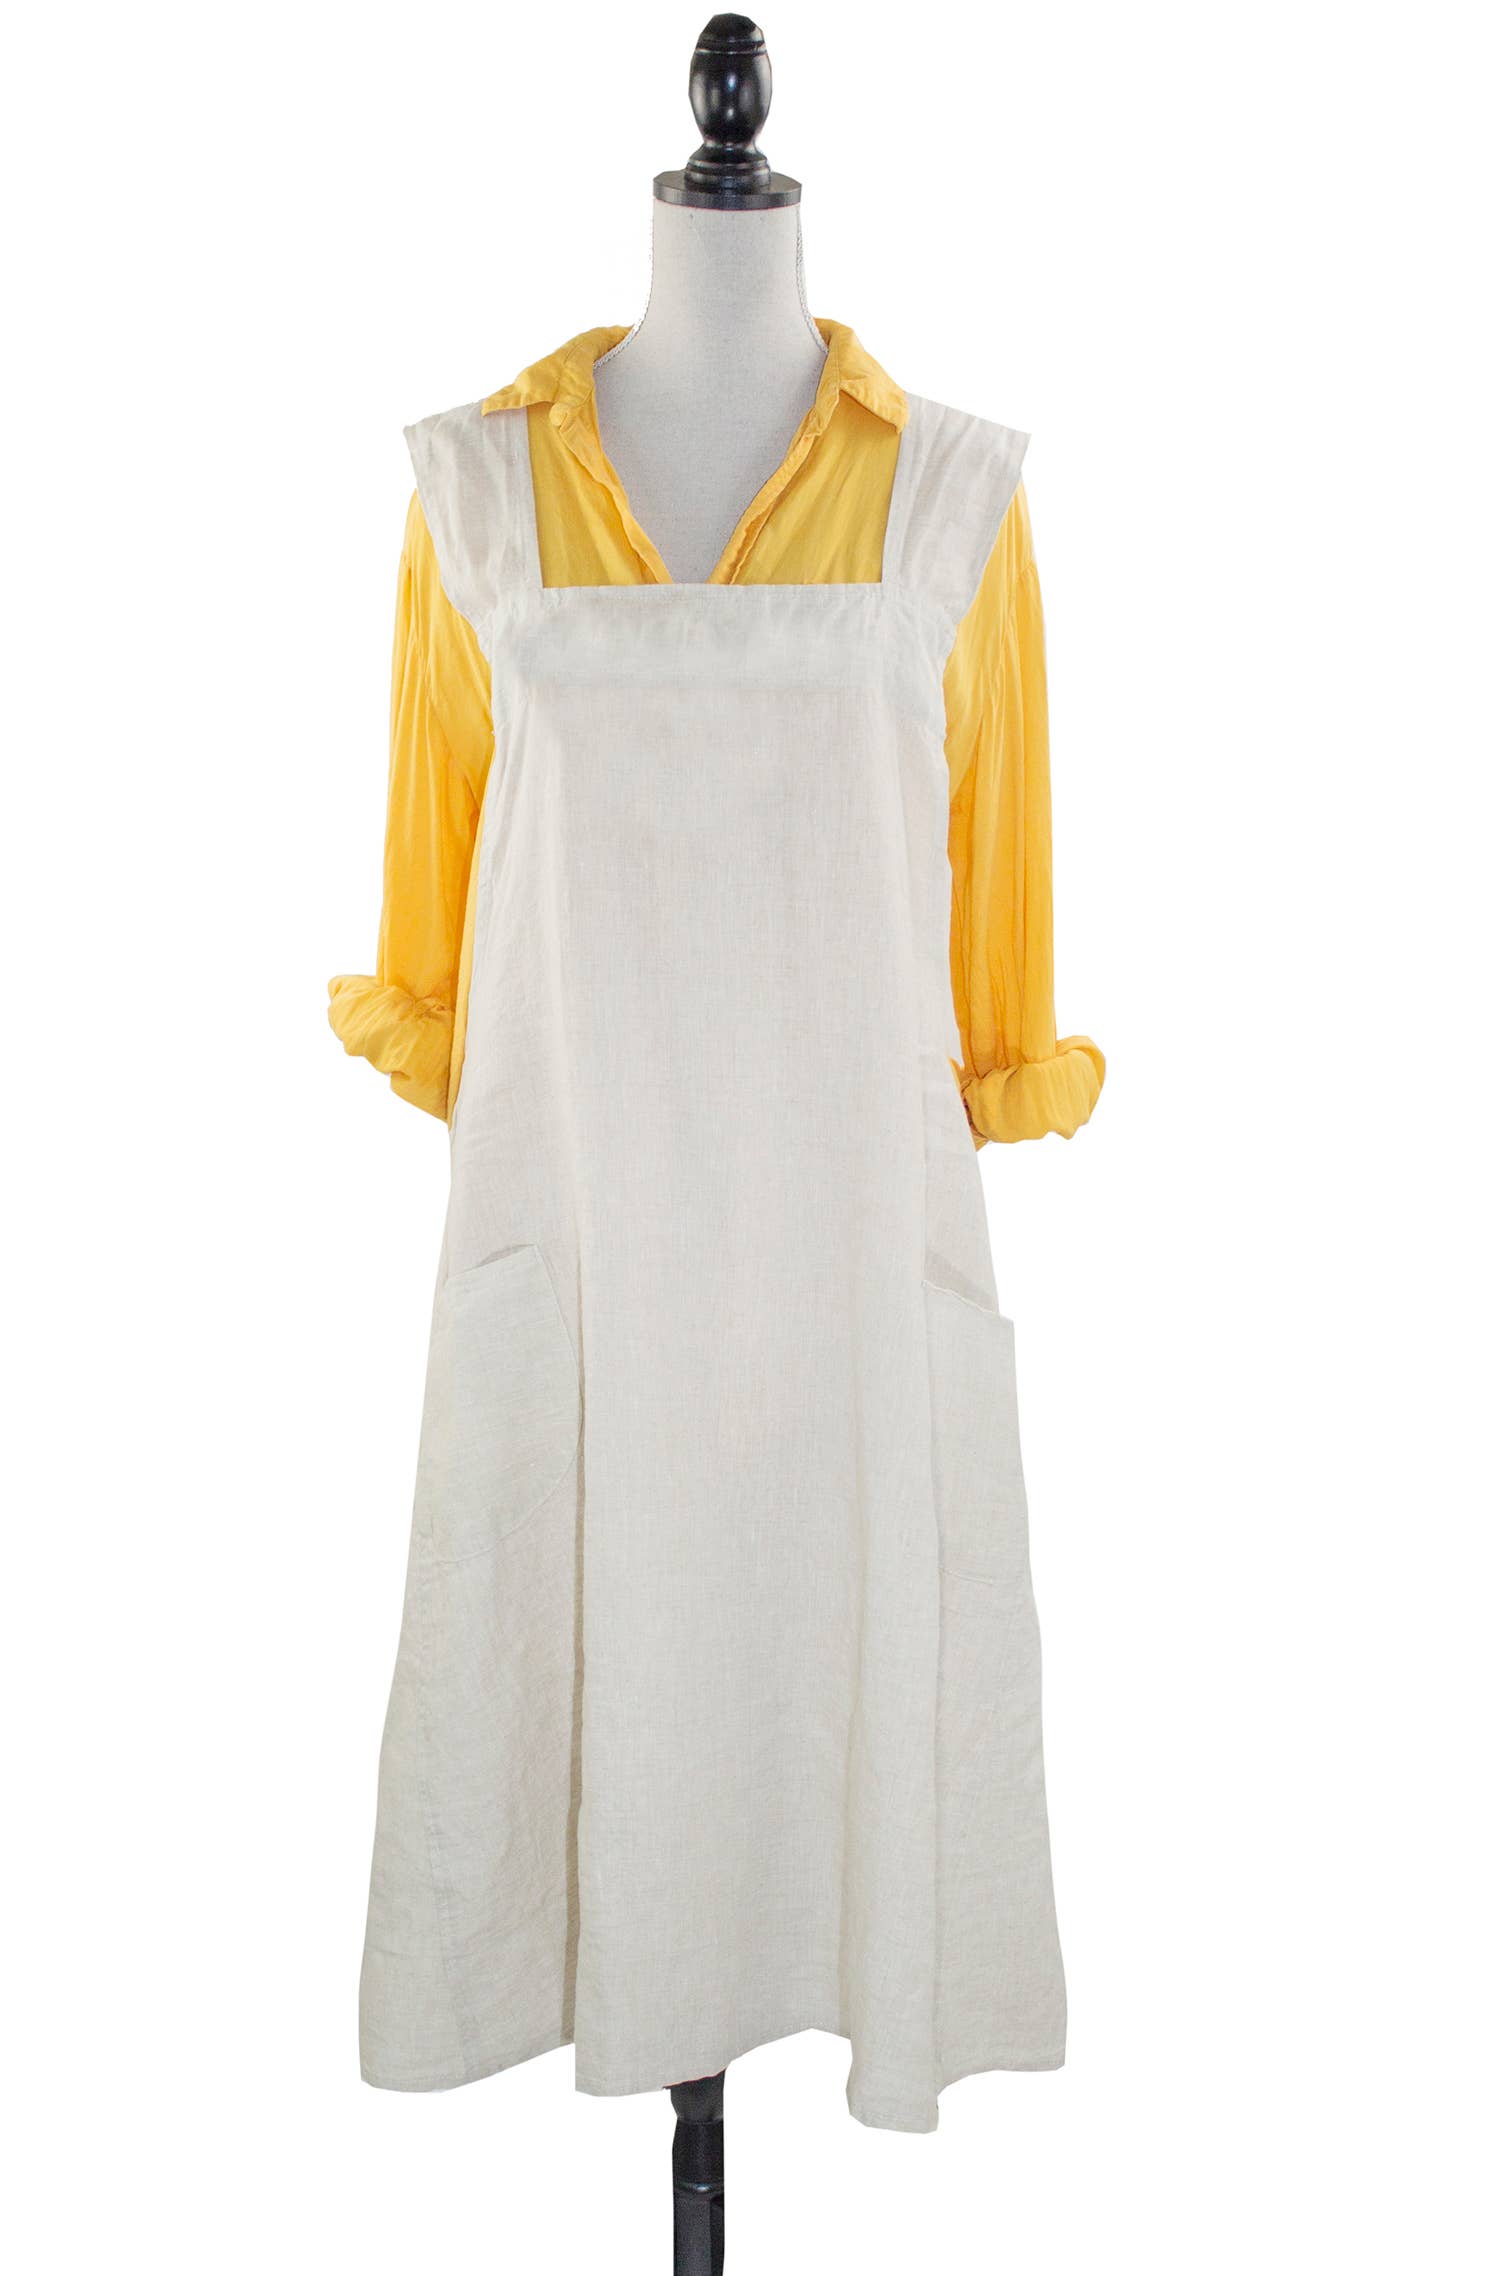 Natural Criss Cross Back Apron Pure Linen Chef Cooking Apron - Out of the Blue